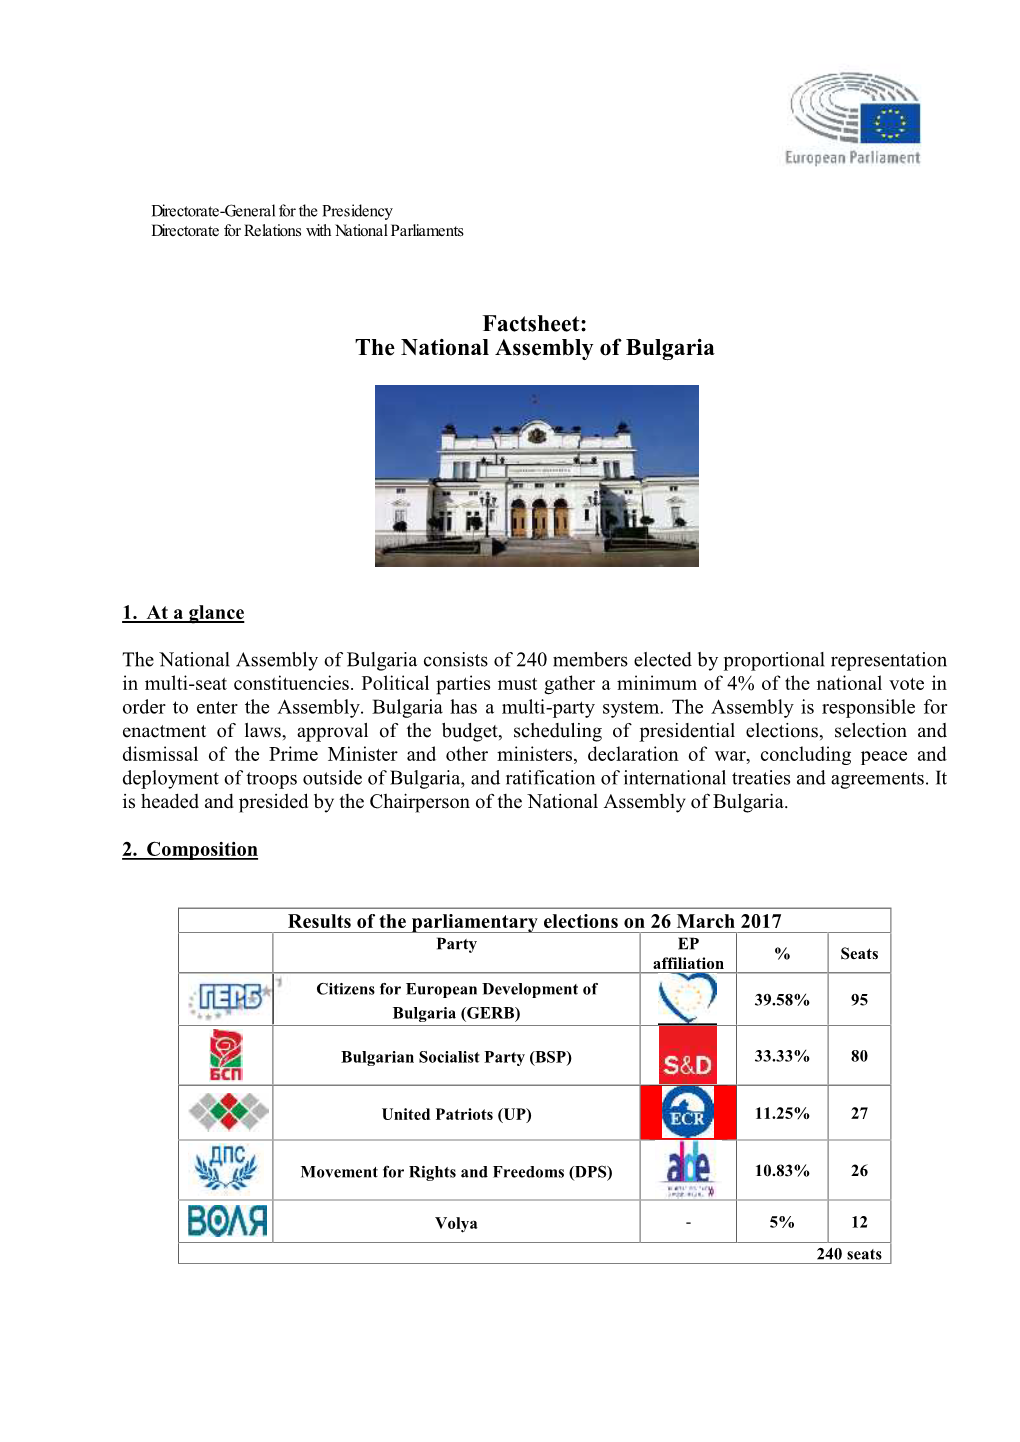 Factsheet: the National Assembly of Bulgaria